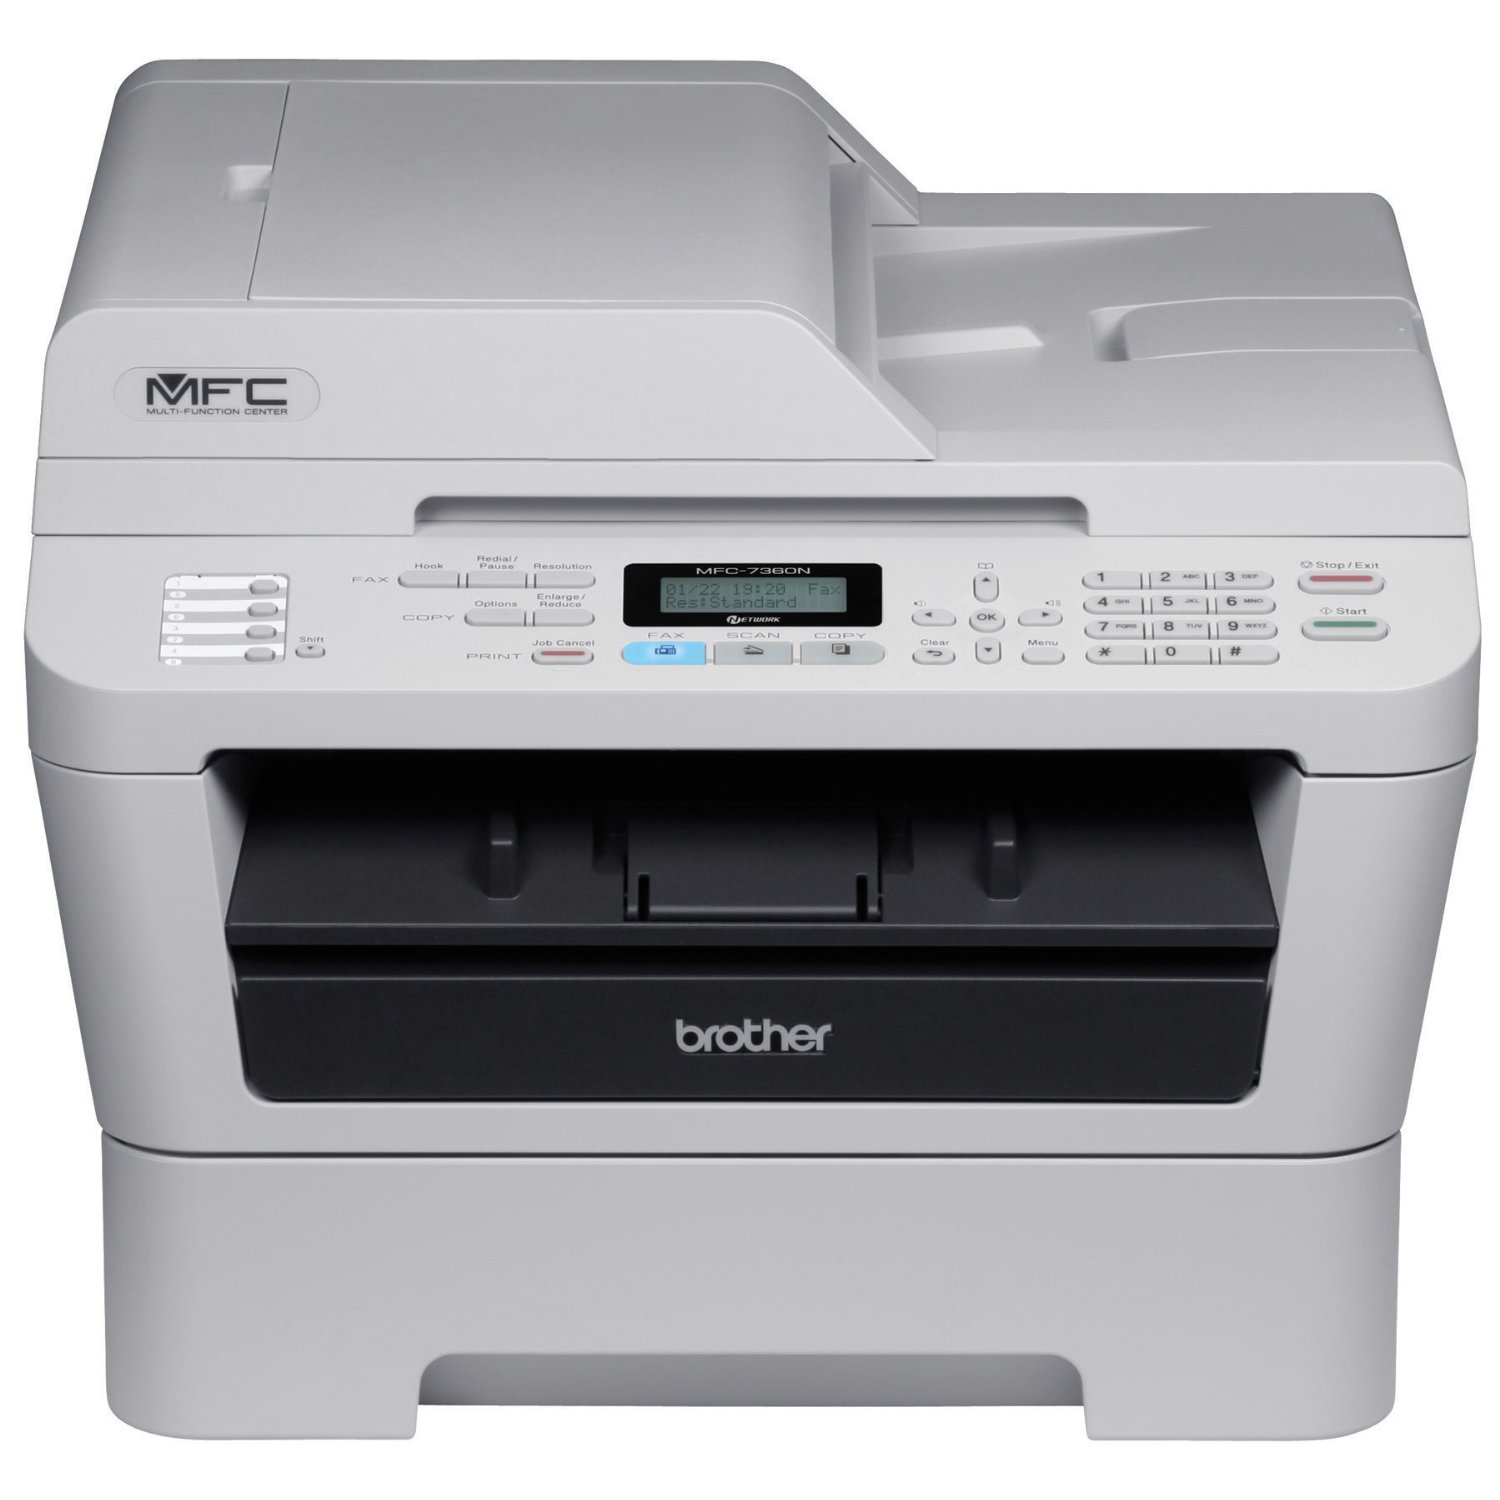 Brother MFC-7360N All-in-One Printer - TechTack - Lessons, Reviews